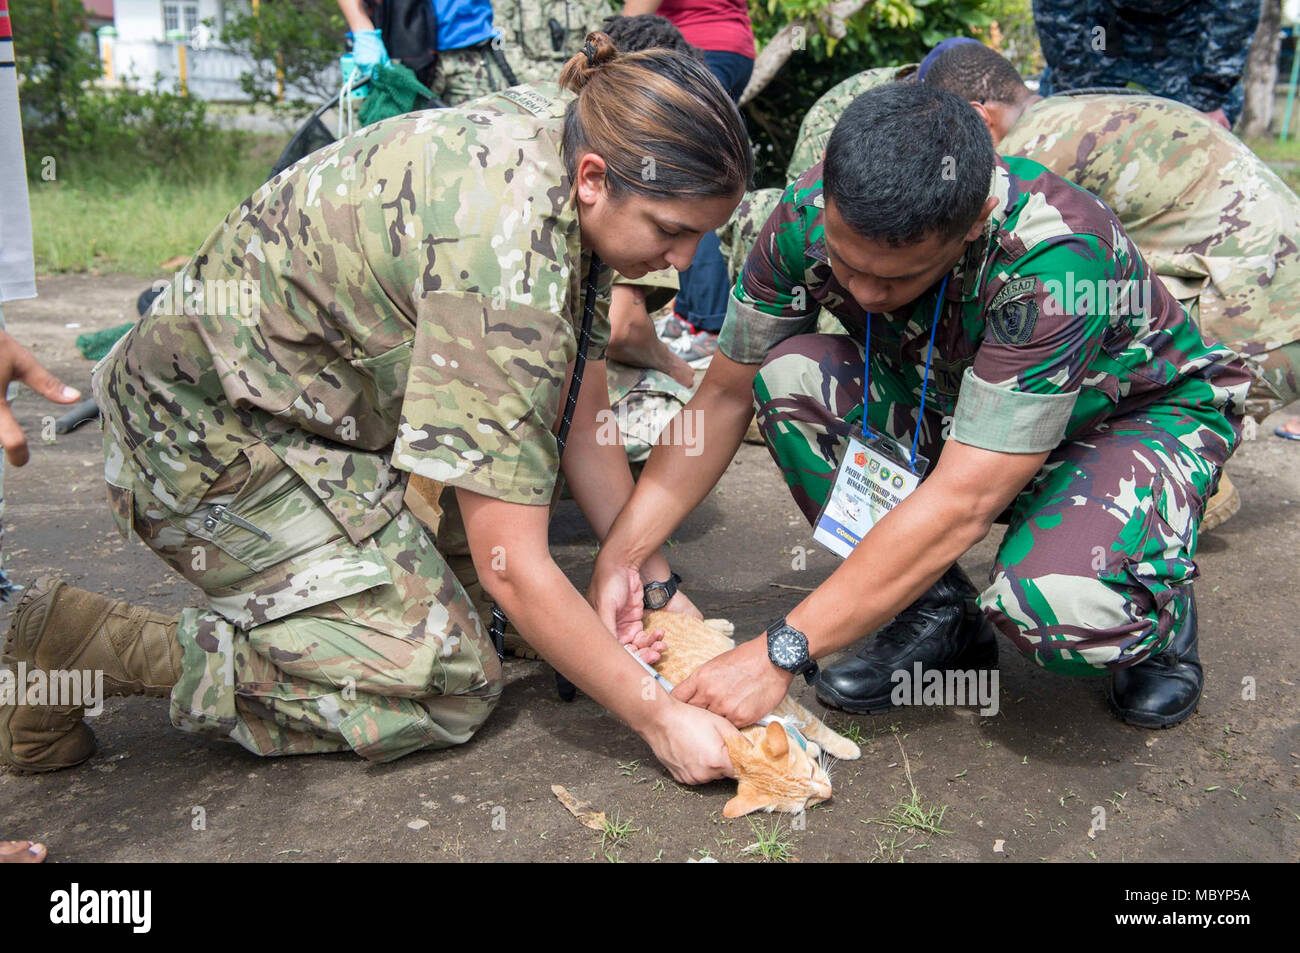 Indonesia (April 4, 2018) Army Spc. Toni Weaver (left), from Castroville, Texas, who is currently assigned to Military Sealift Command hospital ship USNS Mercy (T-AH 19,) demonstrates proper feline handling techniques during a rabies vaccination event.  Weaver and other service members are currently deployed in support of Pacific Partnership 2018. PP18’s mission is to work collectively with host and partner nations to enhance regional interoperability and disaster response capabilities, increase stability and security in the region, and foster new and enduring friendships across the Indo-Pacif Stock Photo